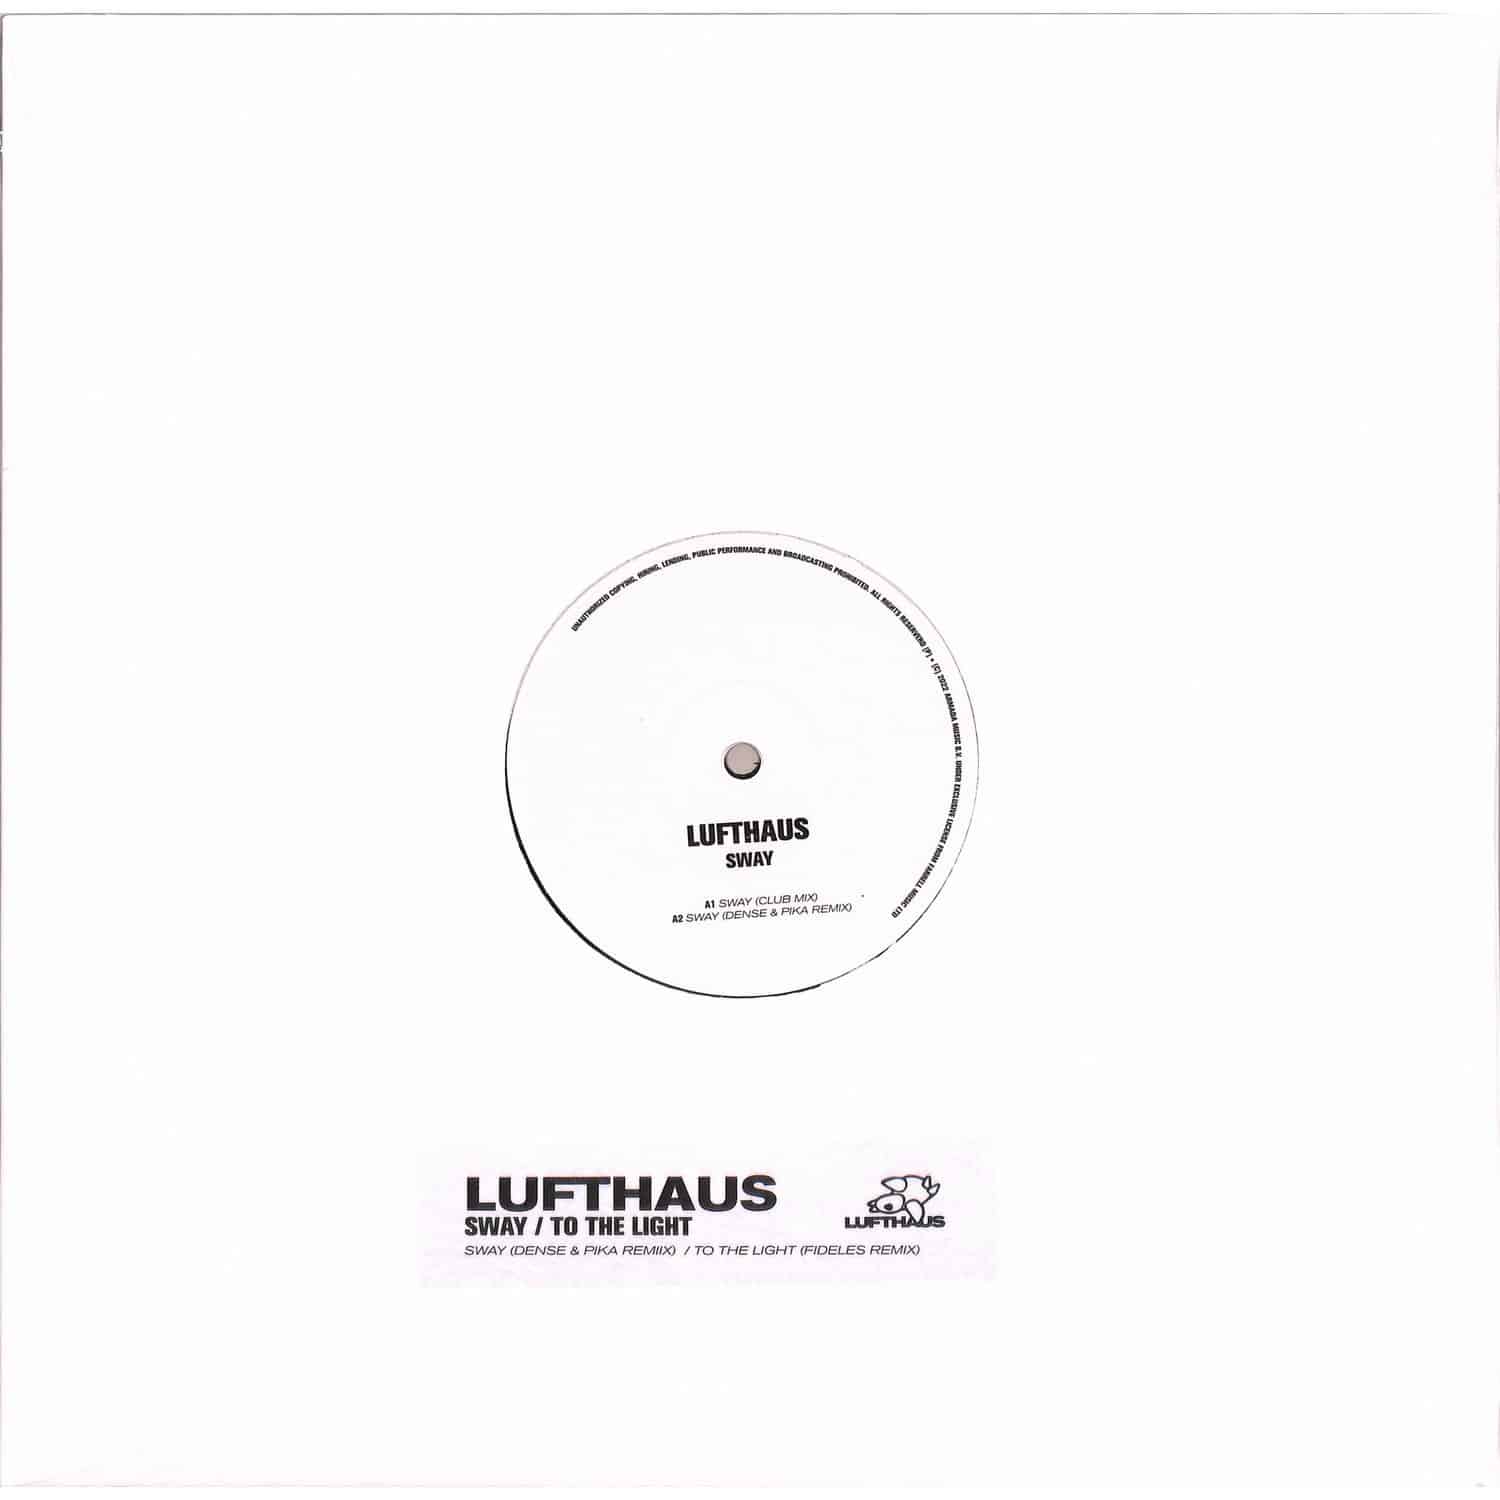 Lufthaus - SWAY / TO THE LIGHT 